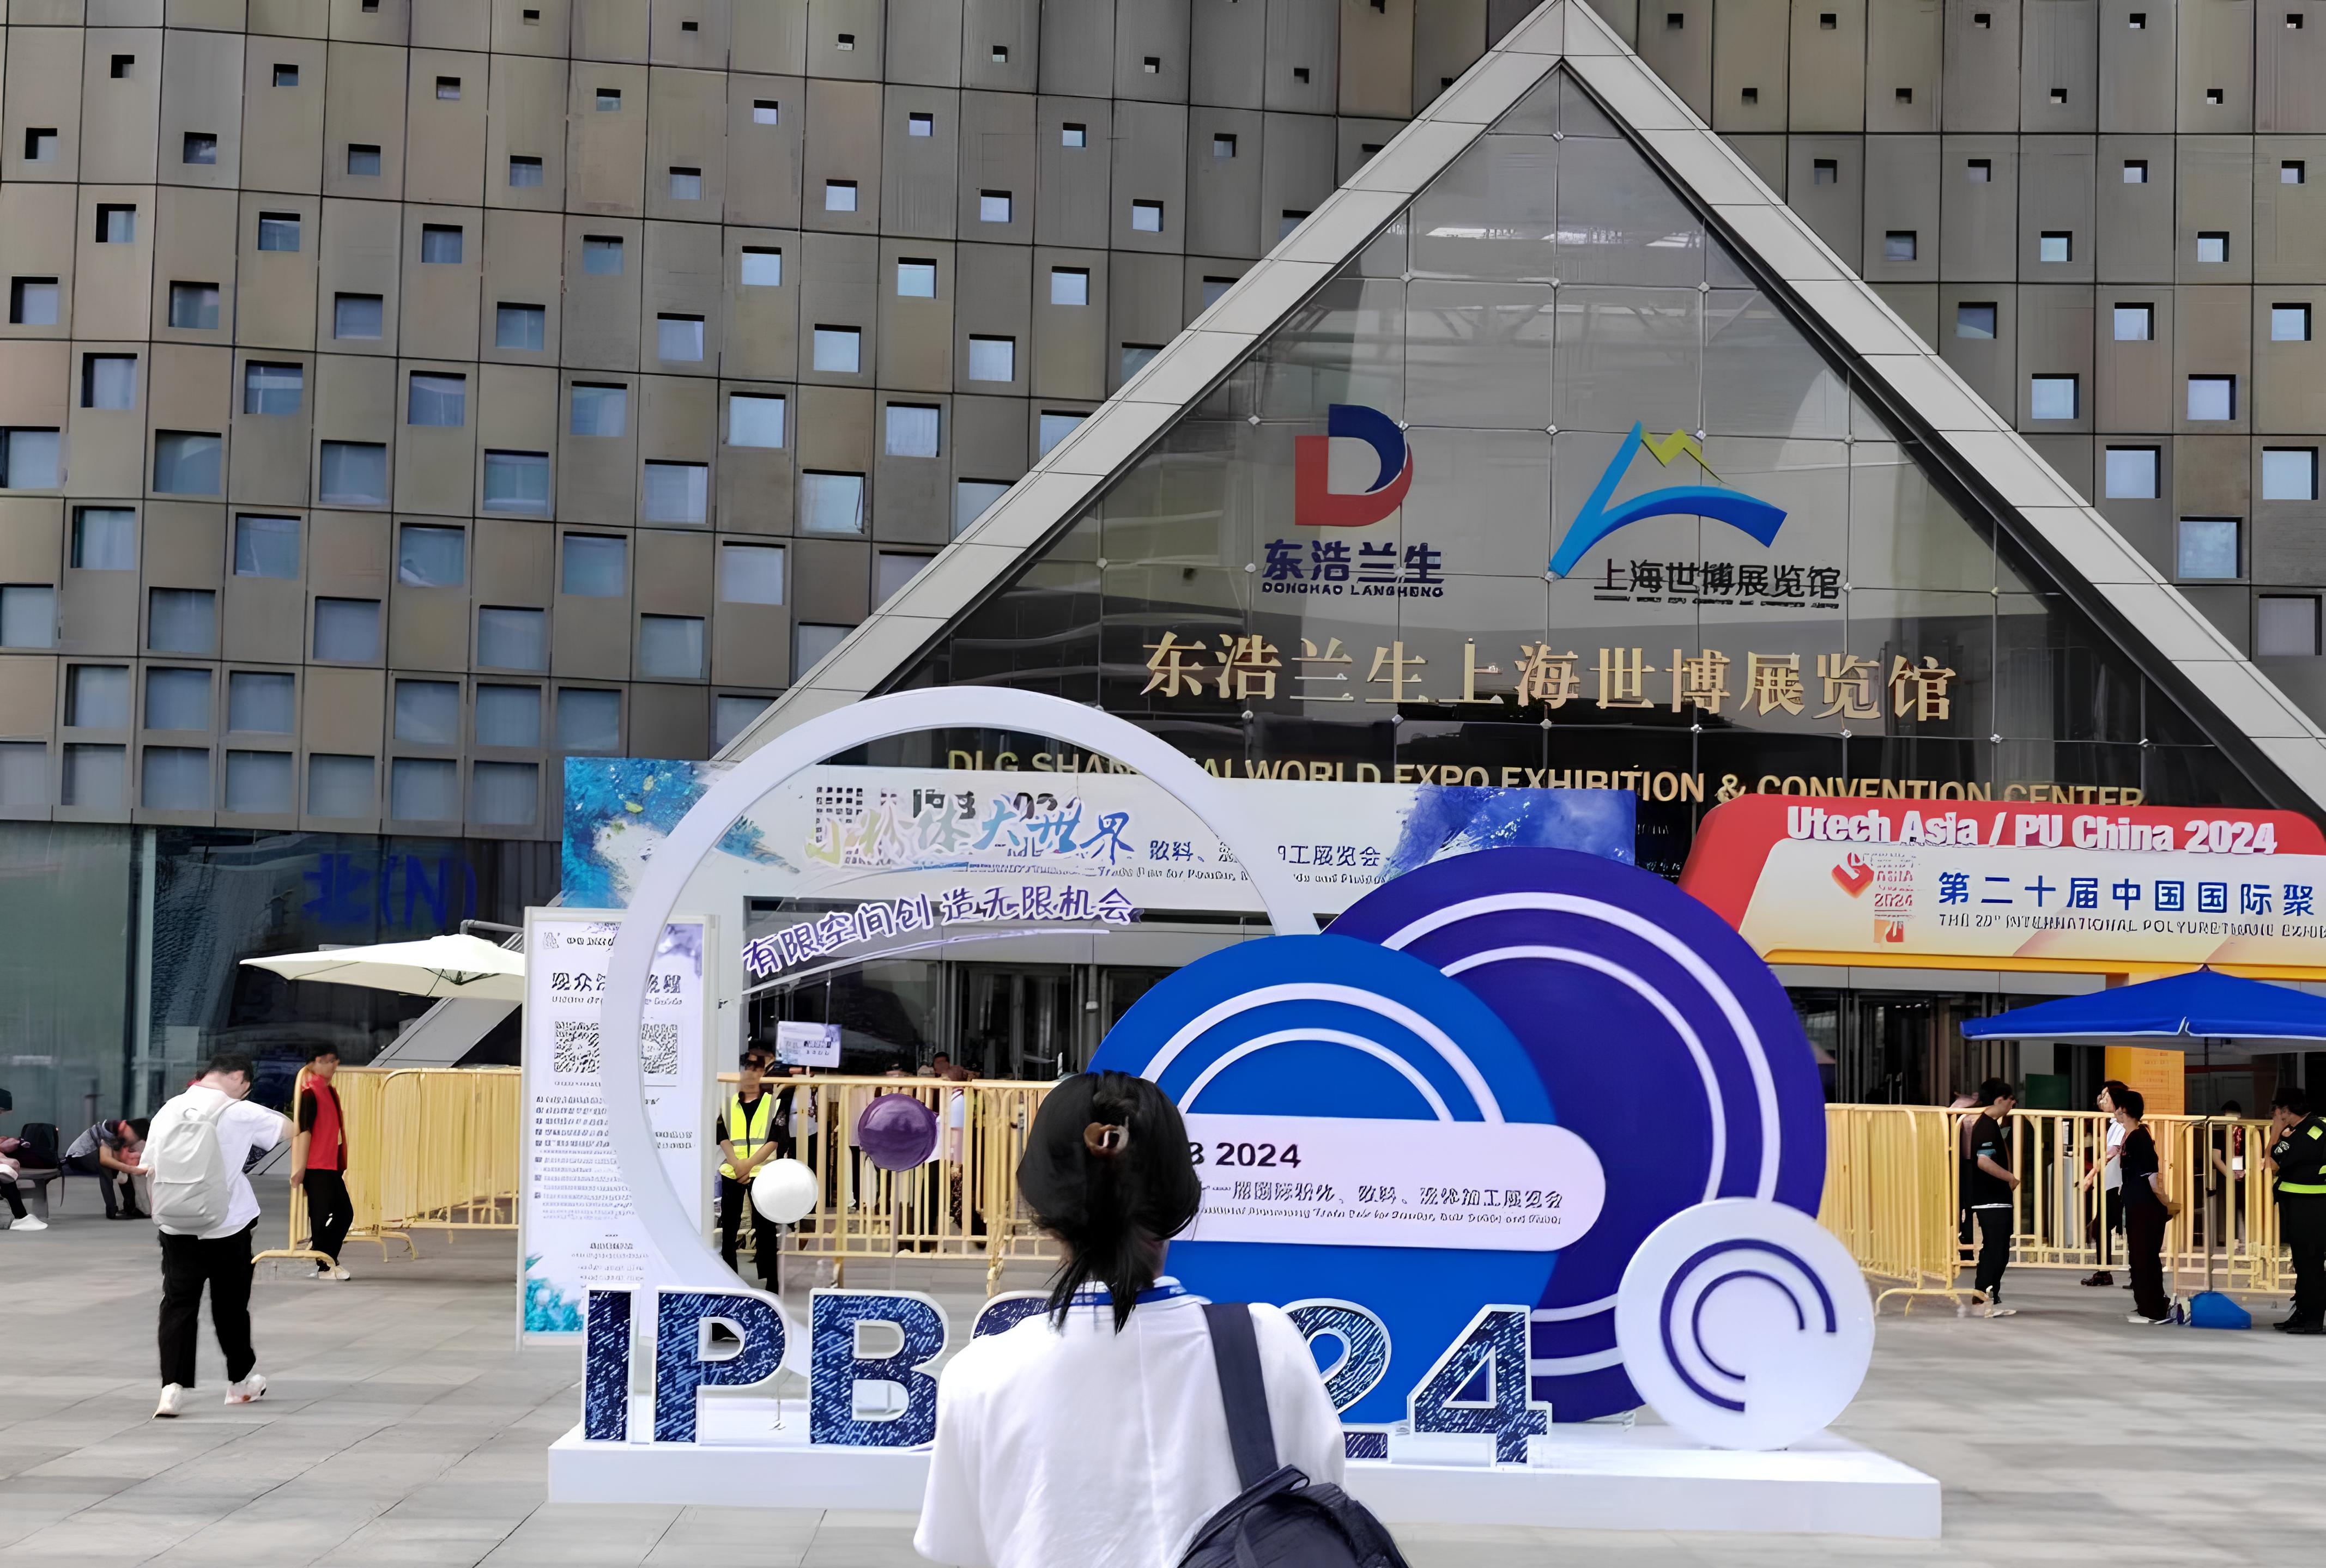 Winner participated in IPB 2024 (The 21st International Powder, Bulk Material and Fluid Processing Exhibition)